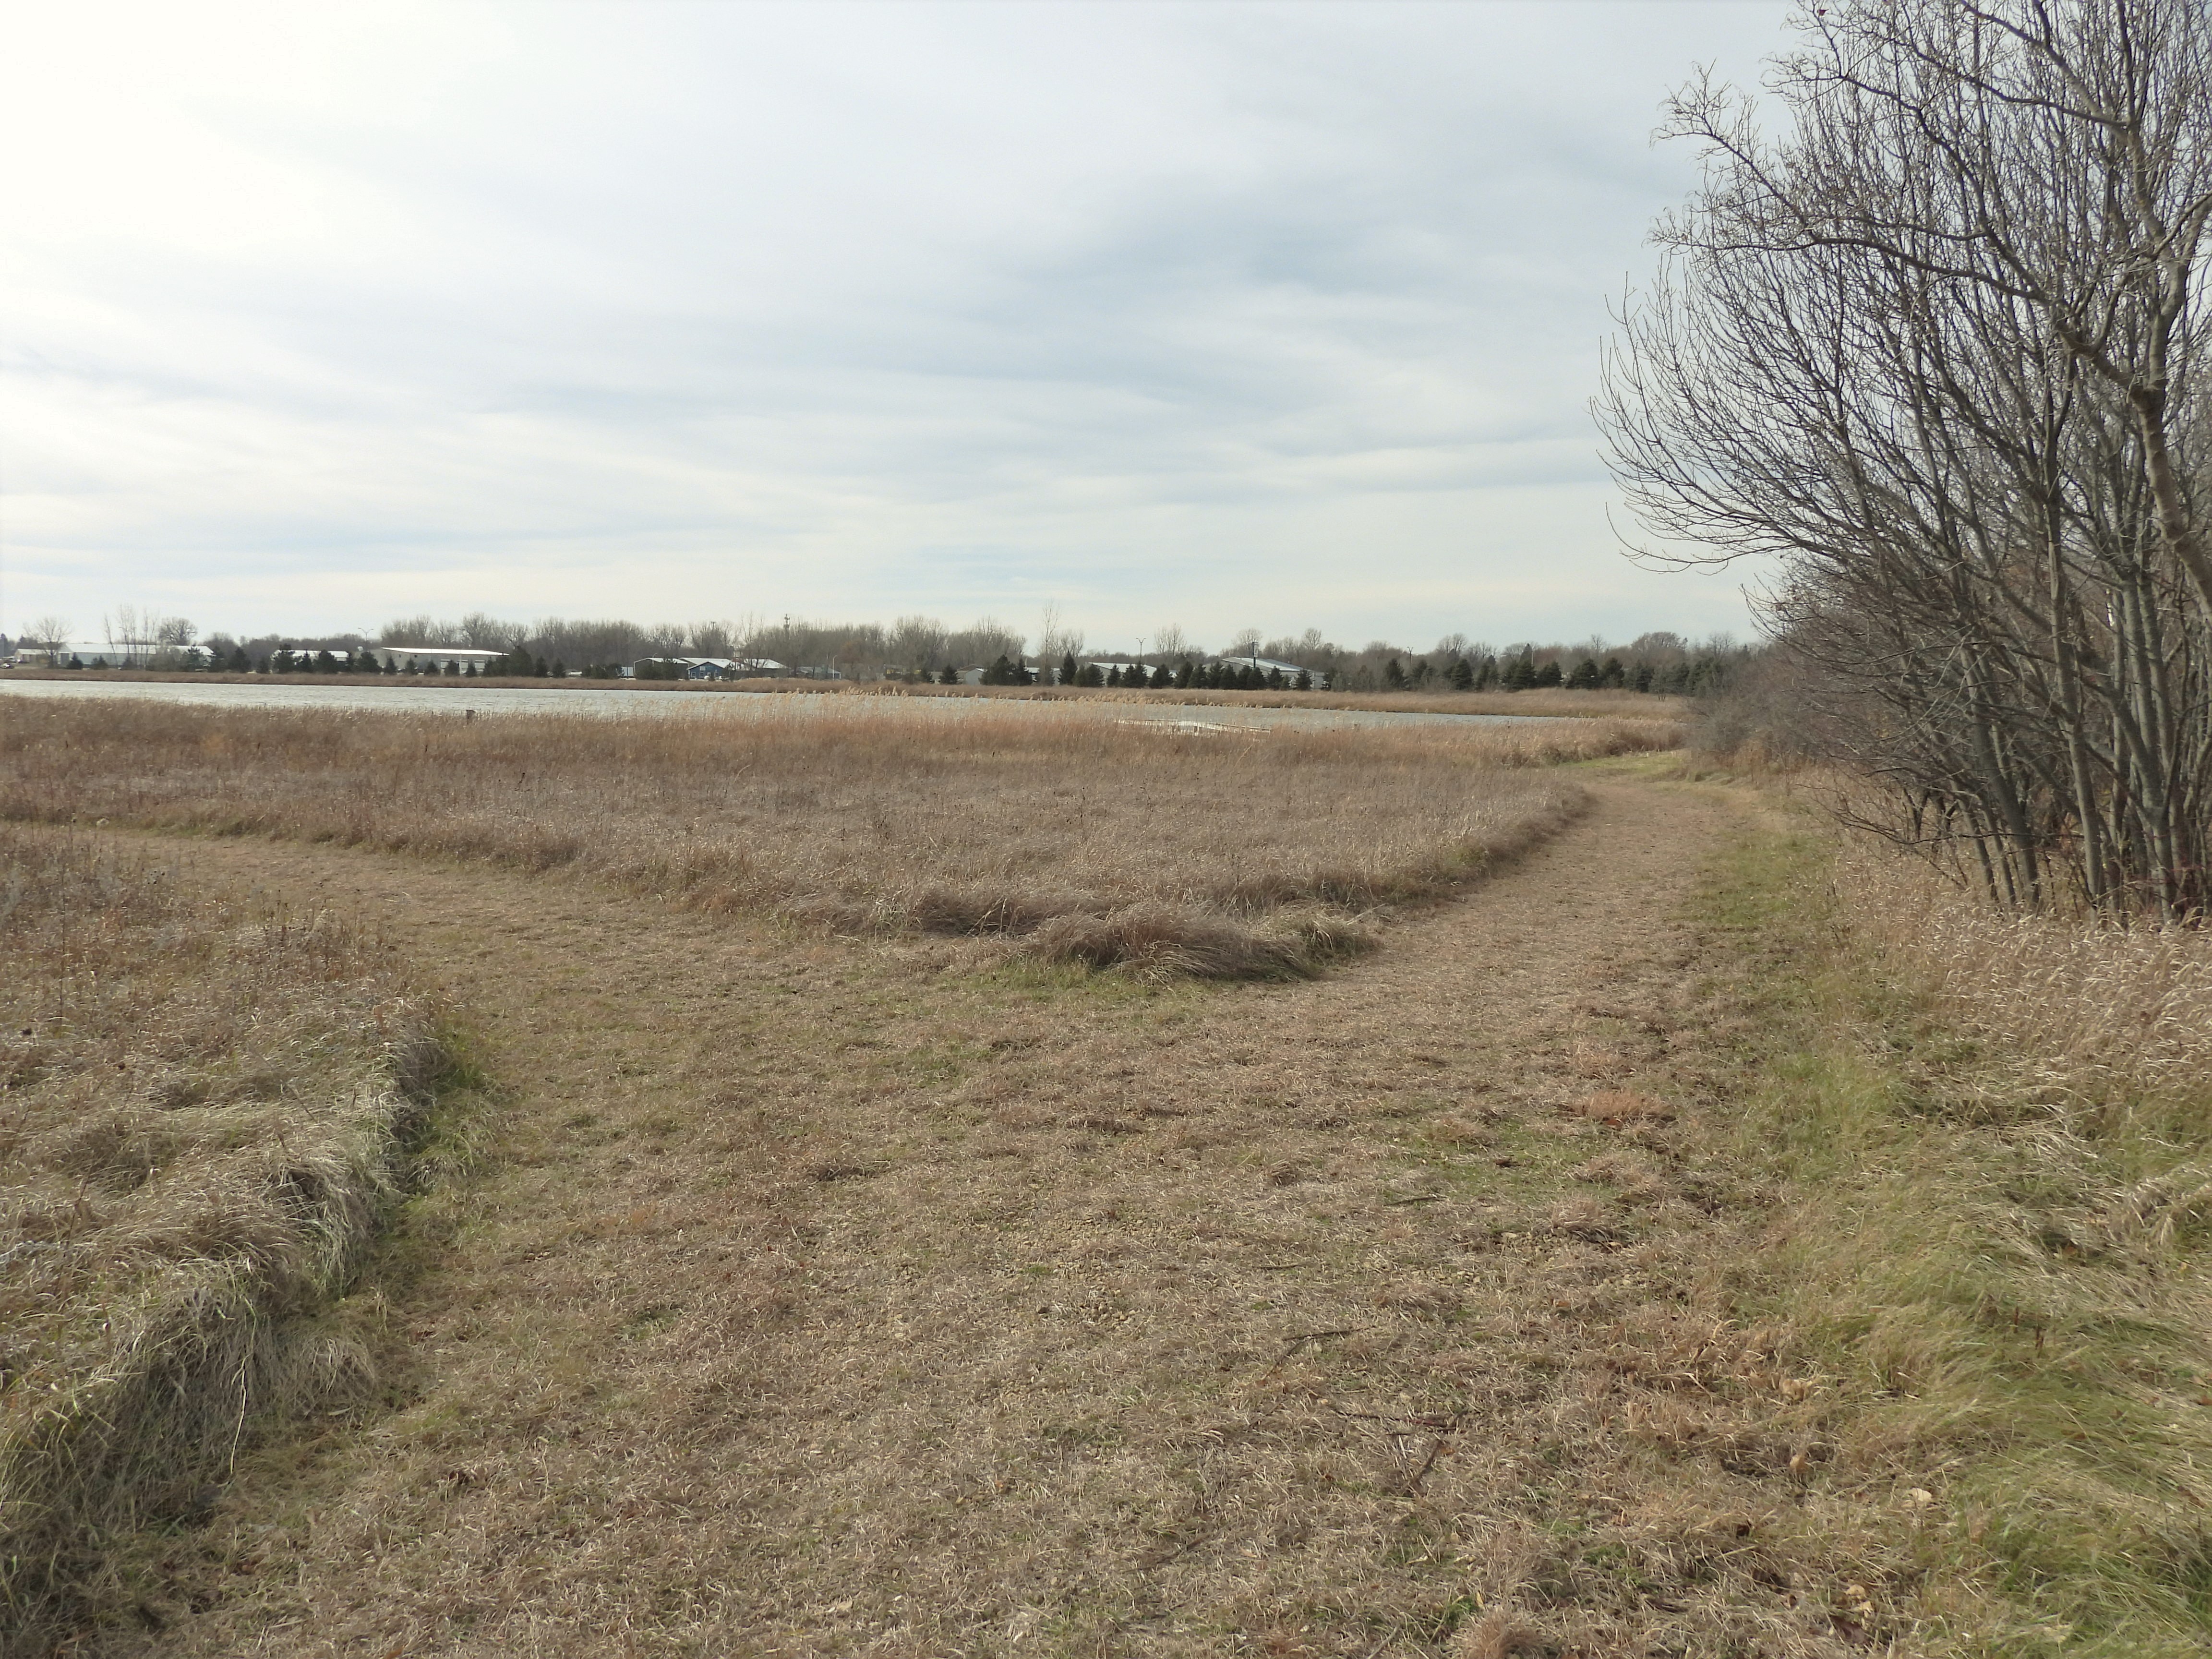 A mowed grass trail splits into two directions. The right split follows woody shrubs down to a wetland, while the left split curves off out of site.